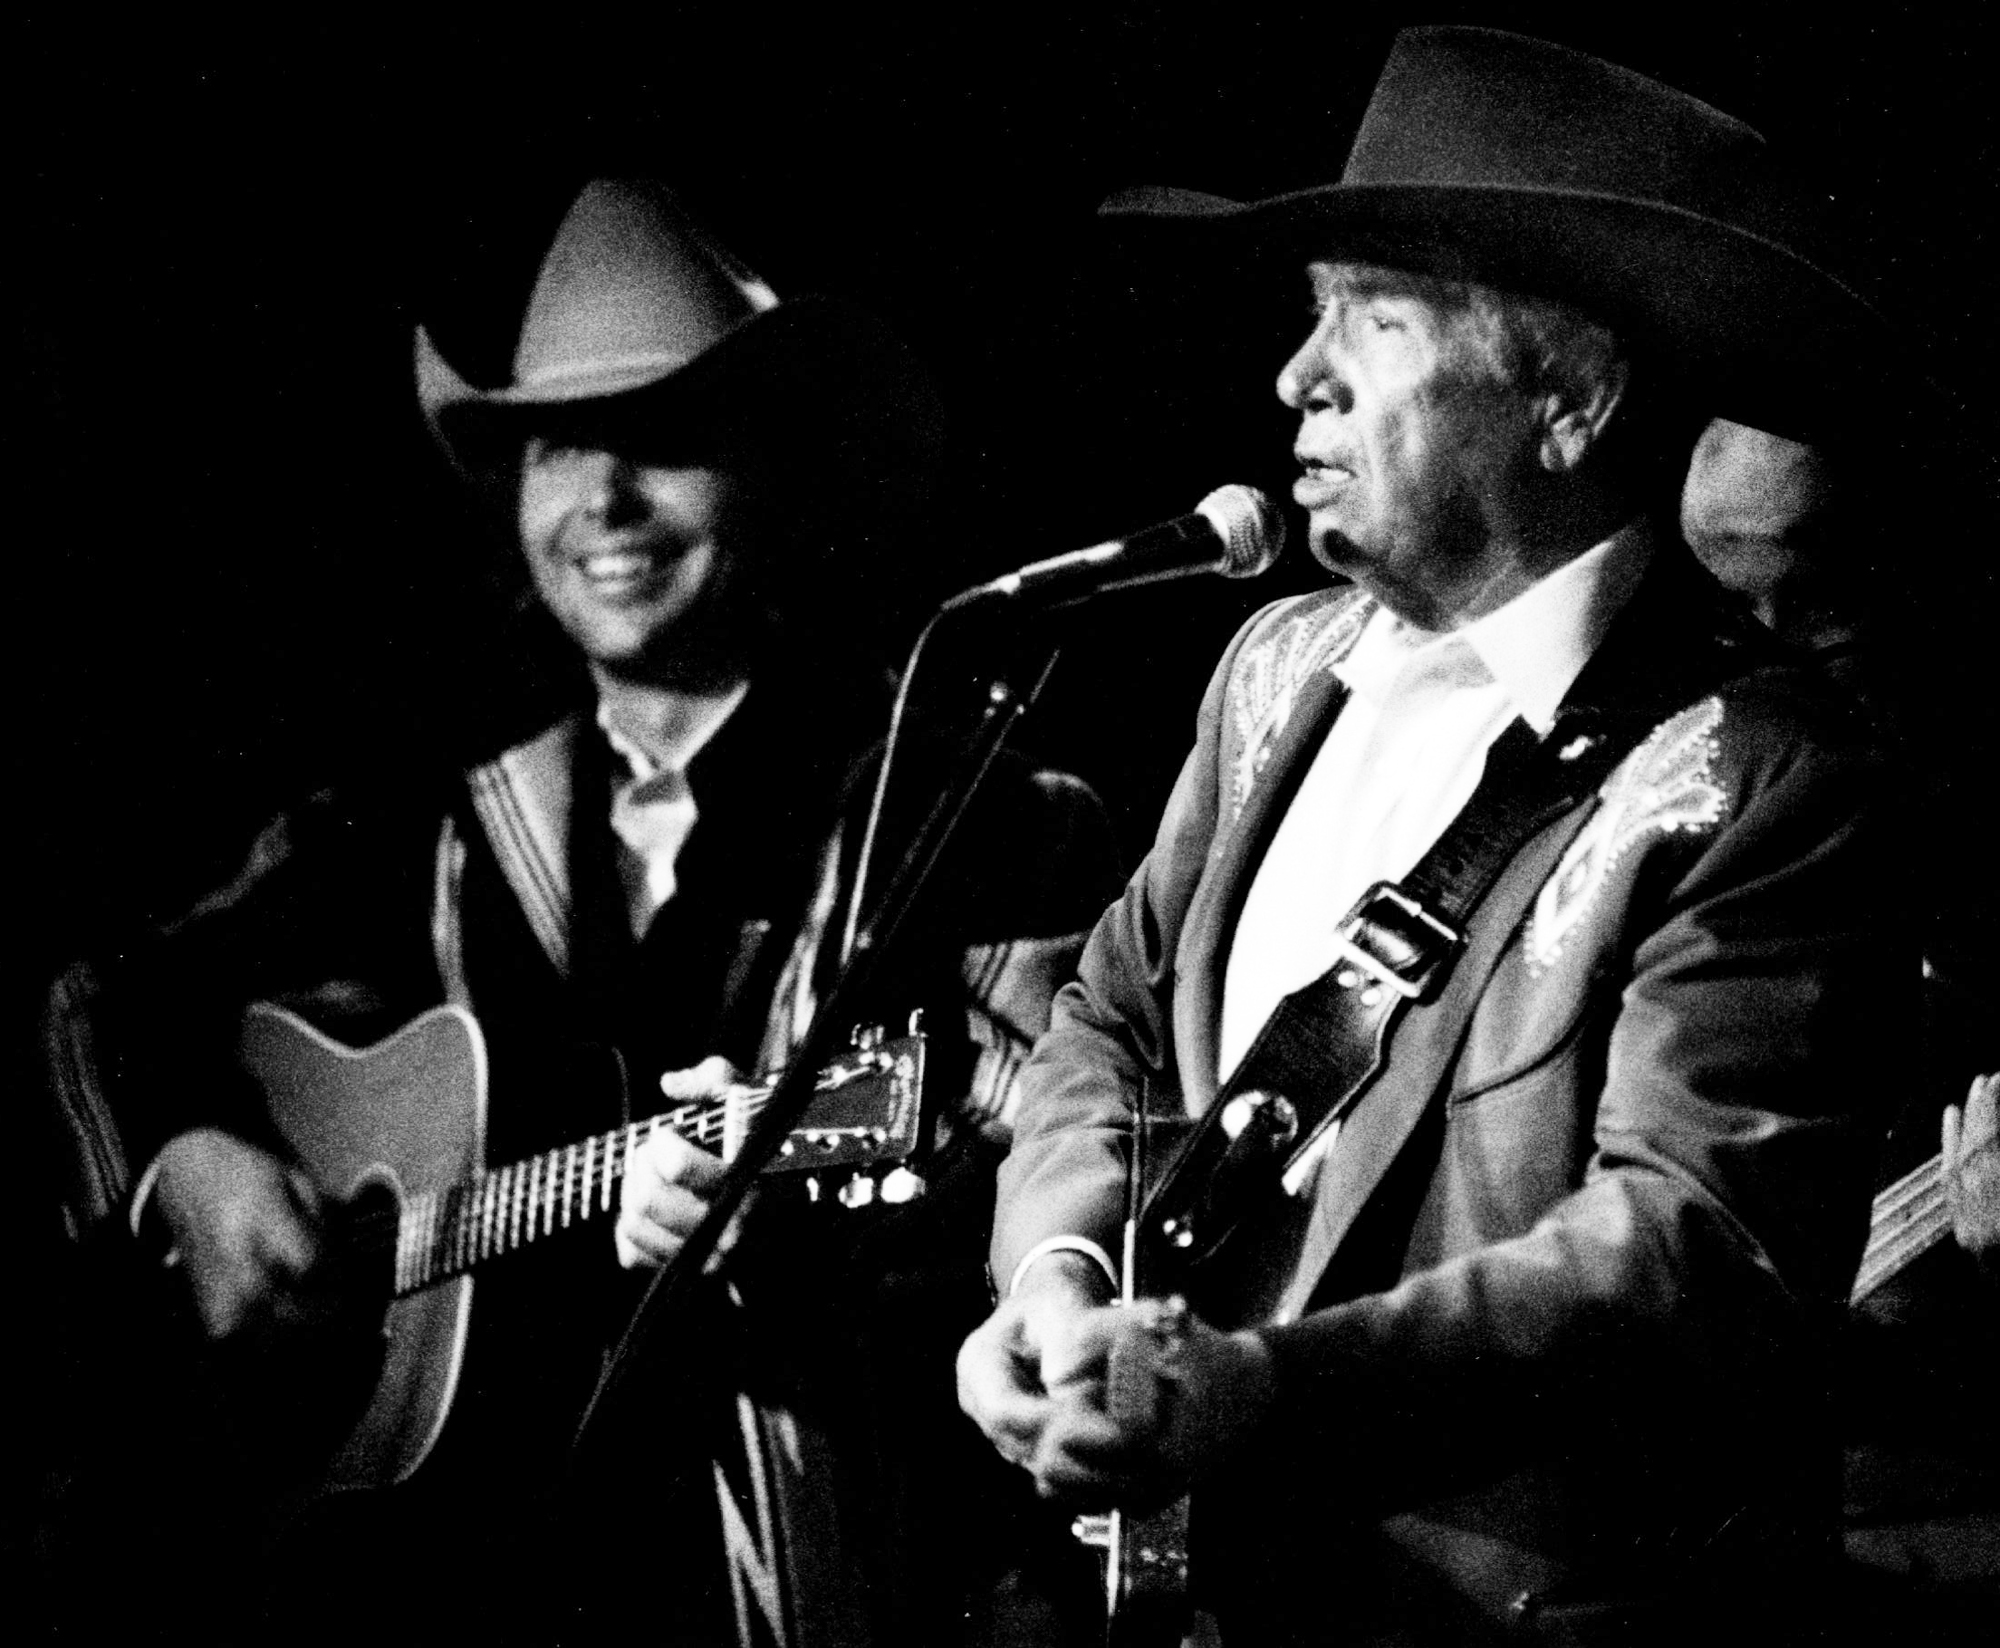 Dwight Yoakam and Buck Owens in Conversation: Our 1988 Feature